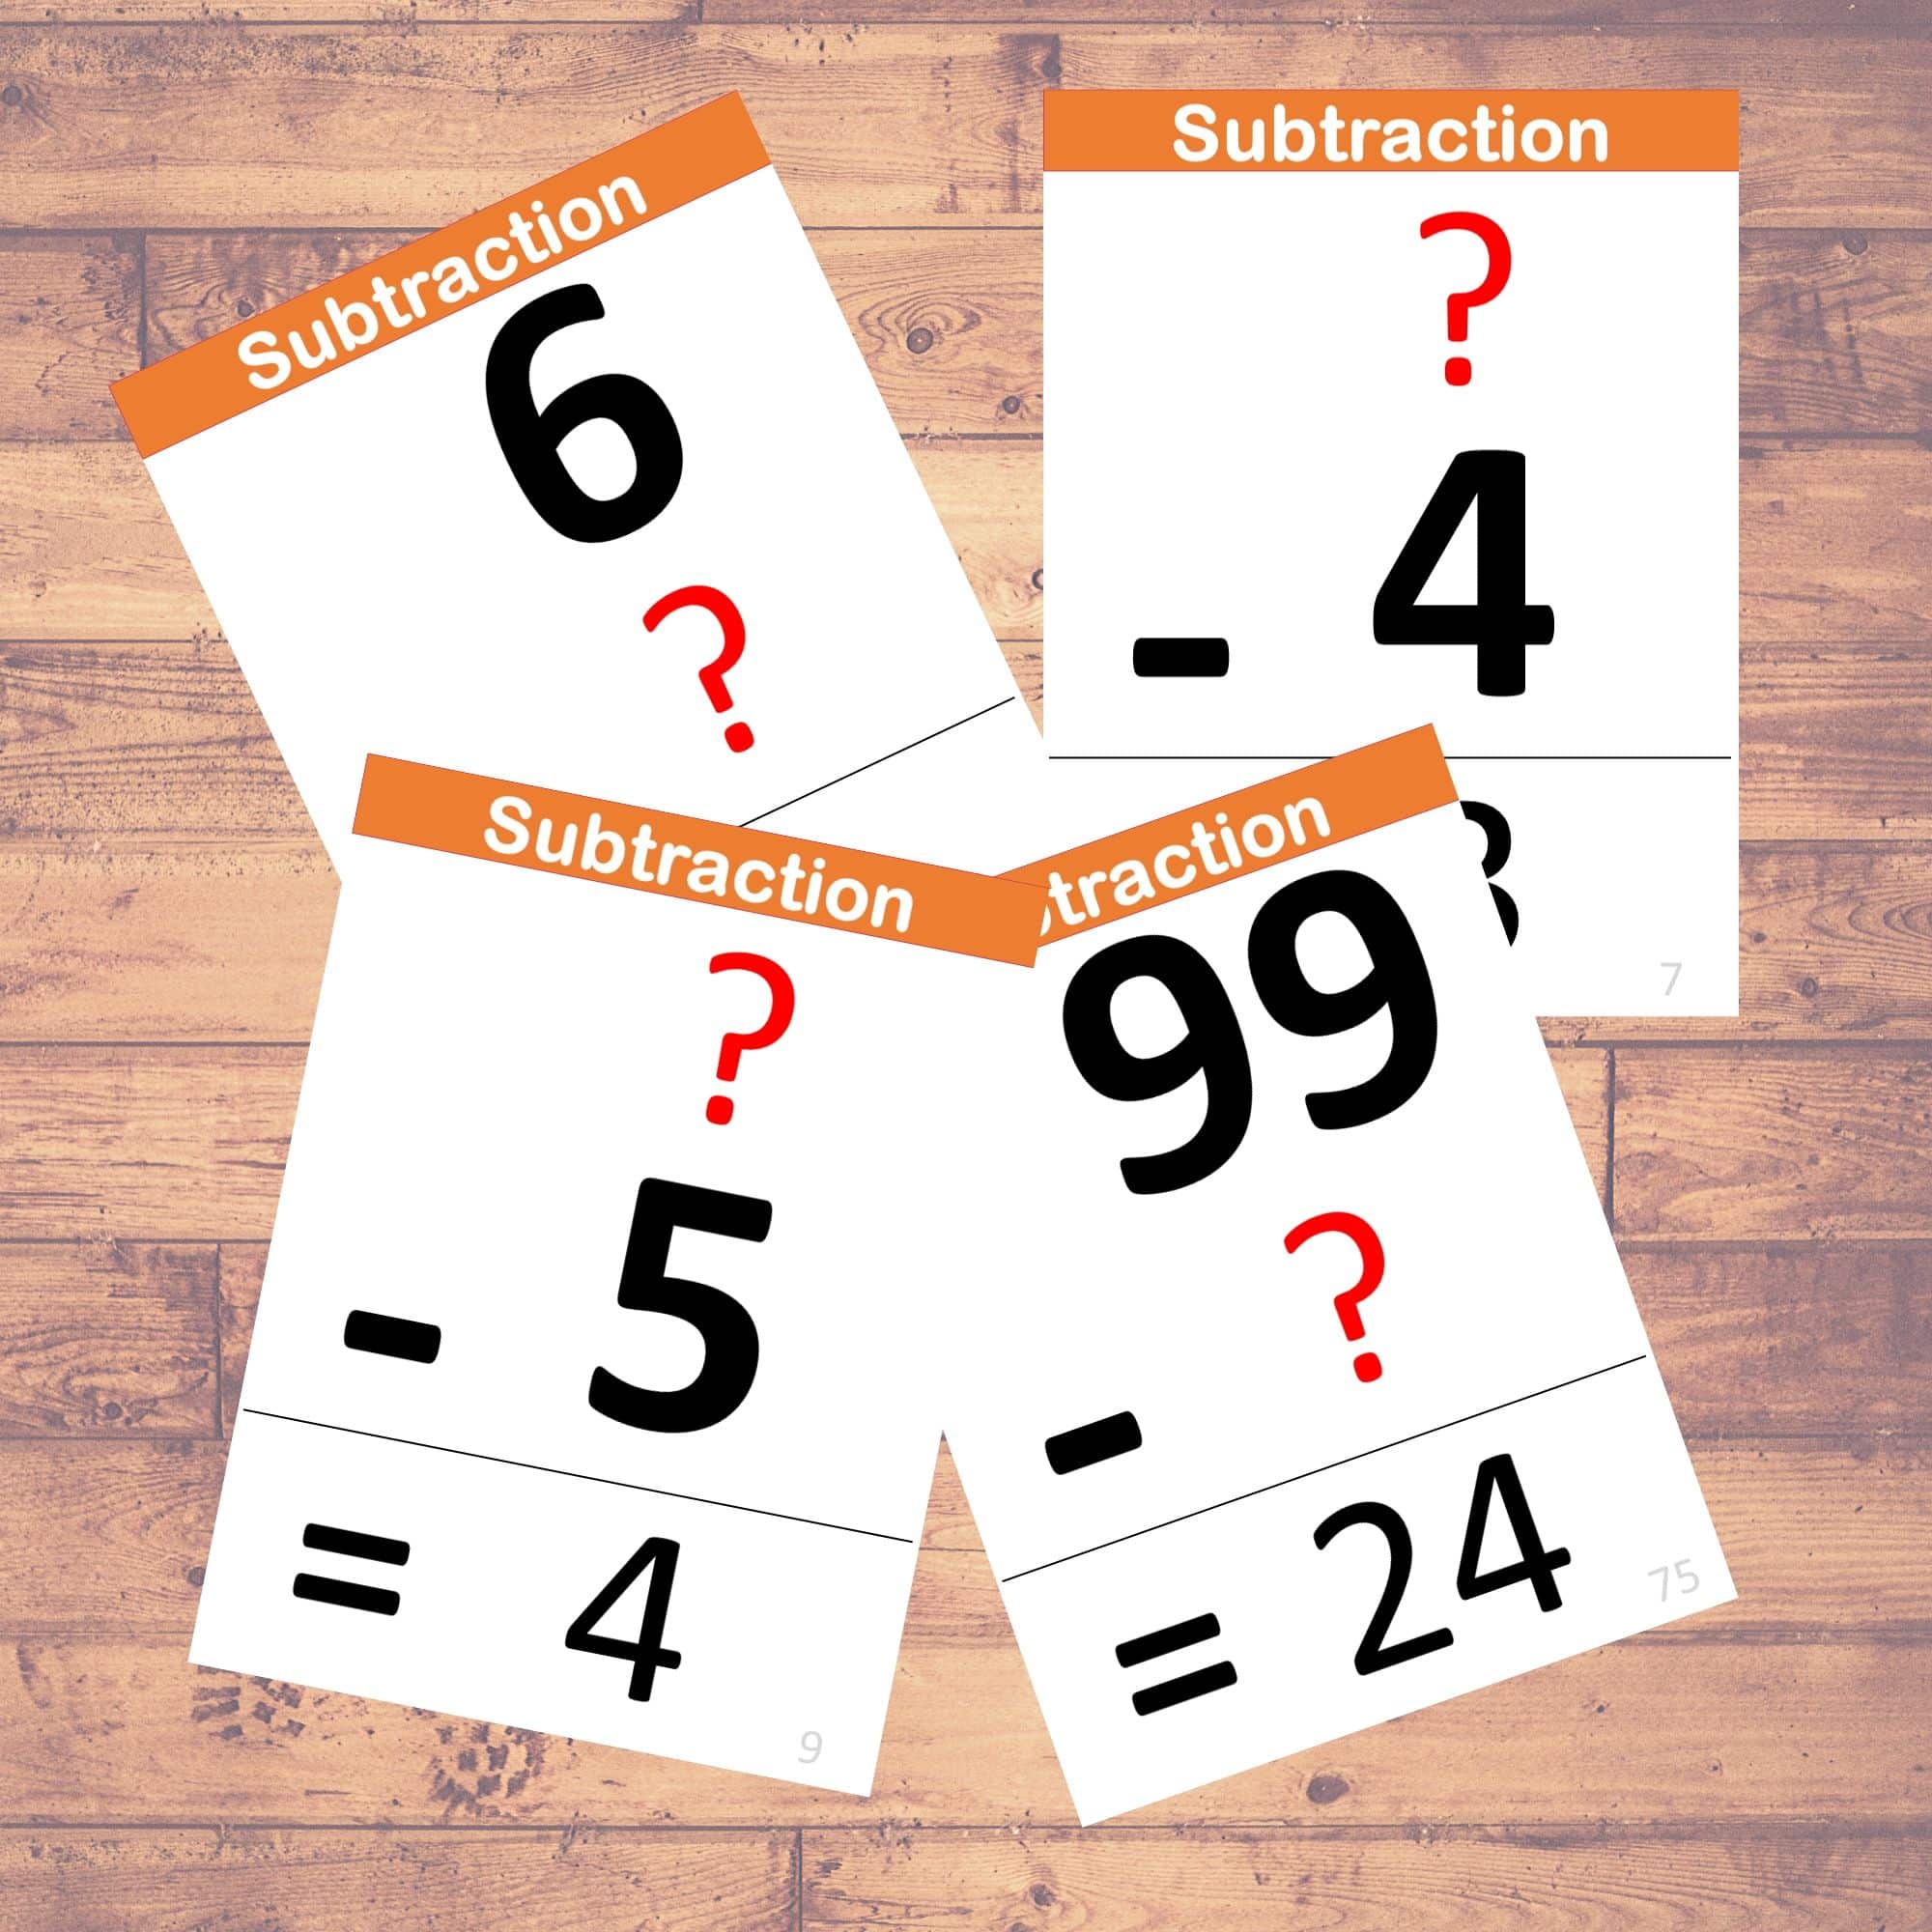 subtraction-problems-flashcards-math-learning-40-cards